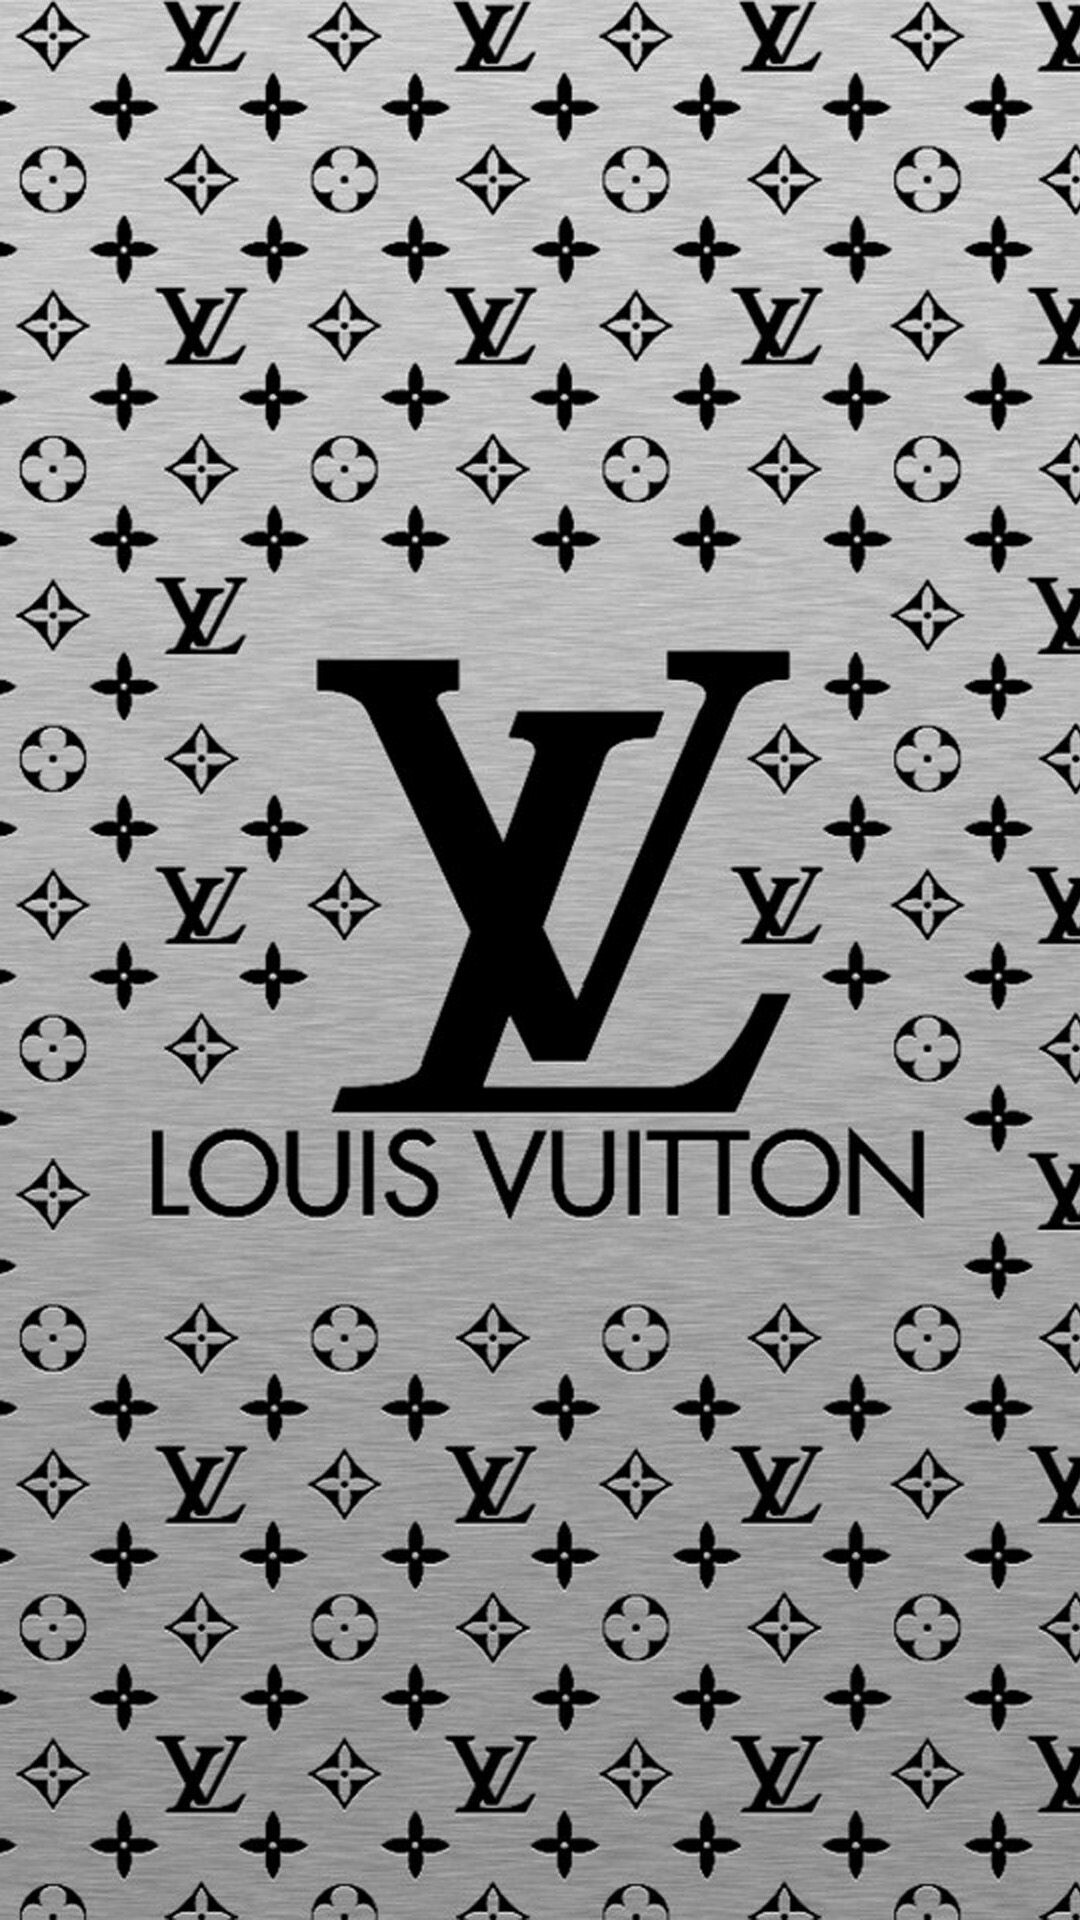 Louis Vuitton: The brand released the Damier Graphite canvas in 2008. 1080x1920 Full HD Background.